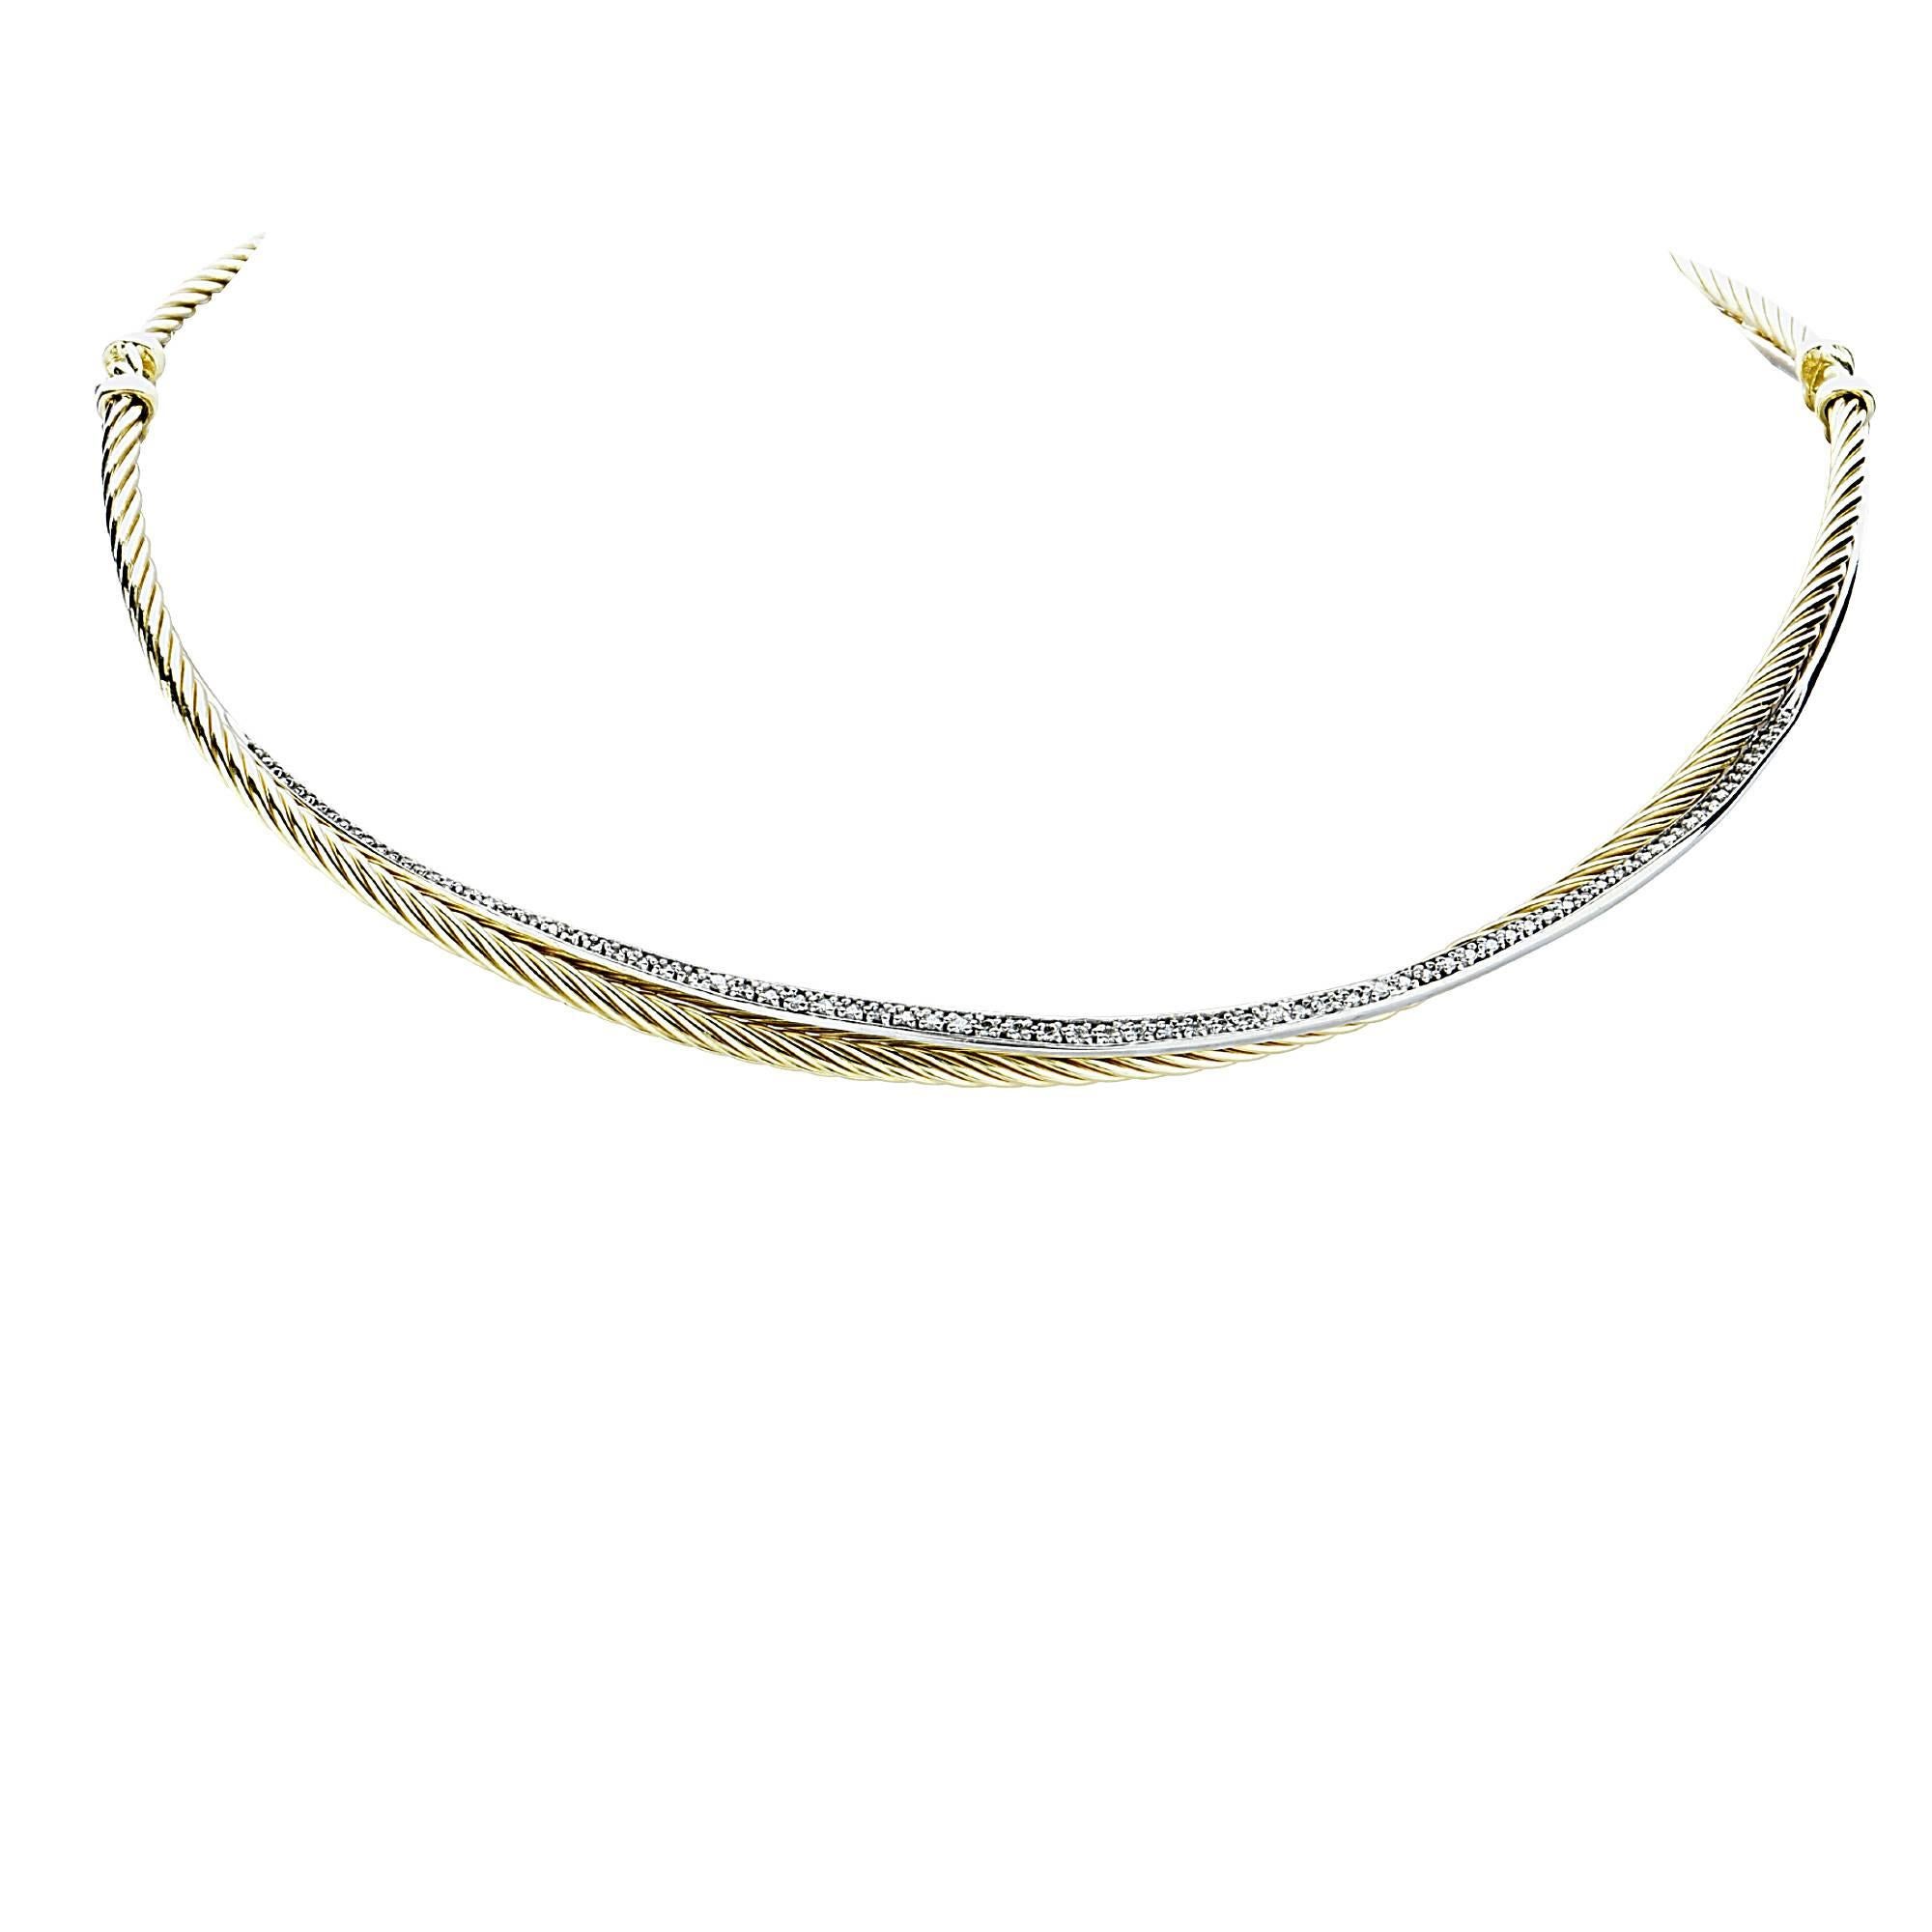 18k yellow and white gold David Yurman necklace containing 80 single cut diamonds weighing approximately .75cts.

Metal weight: 32.96 grams

This diamond ring is accompanied by a retail appraisal performed by a GIA Graduate Gemologist.